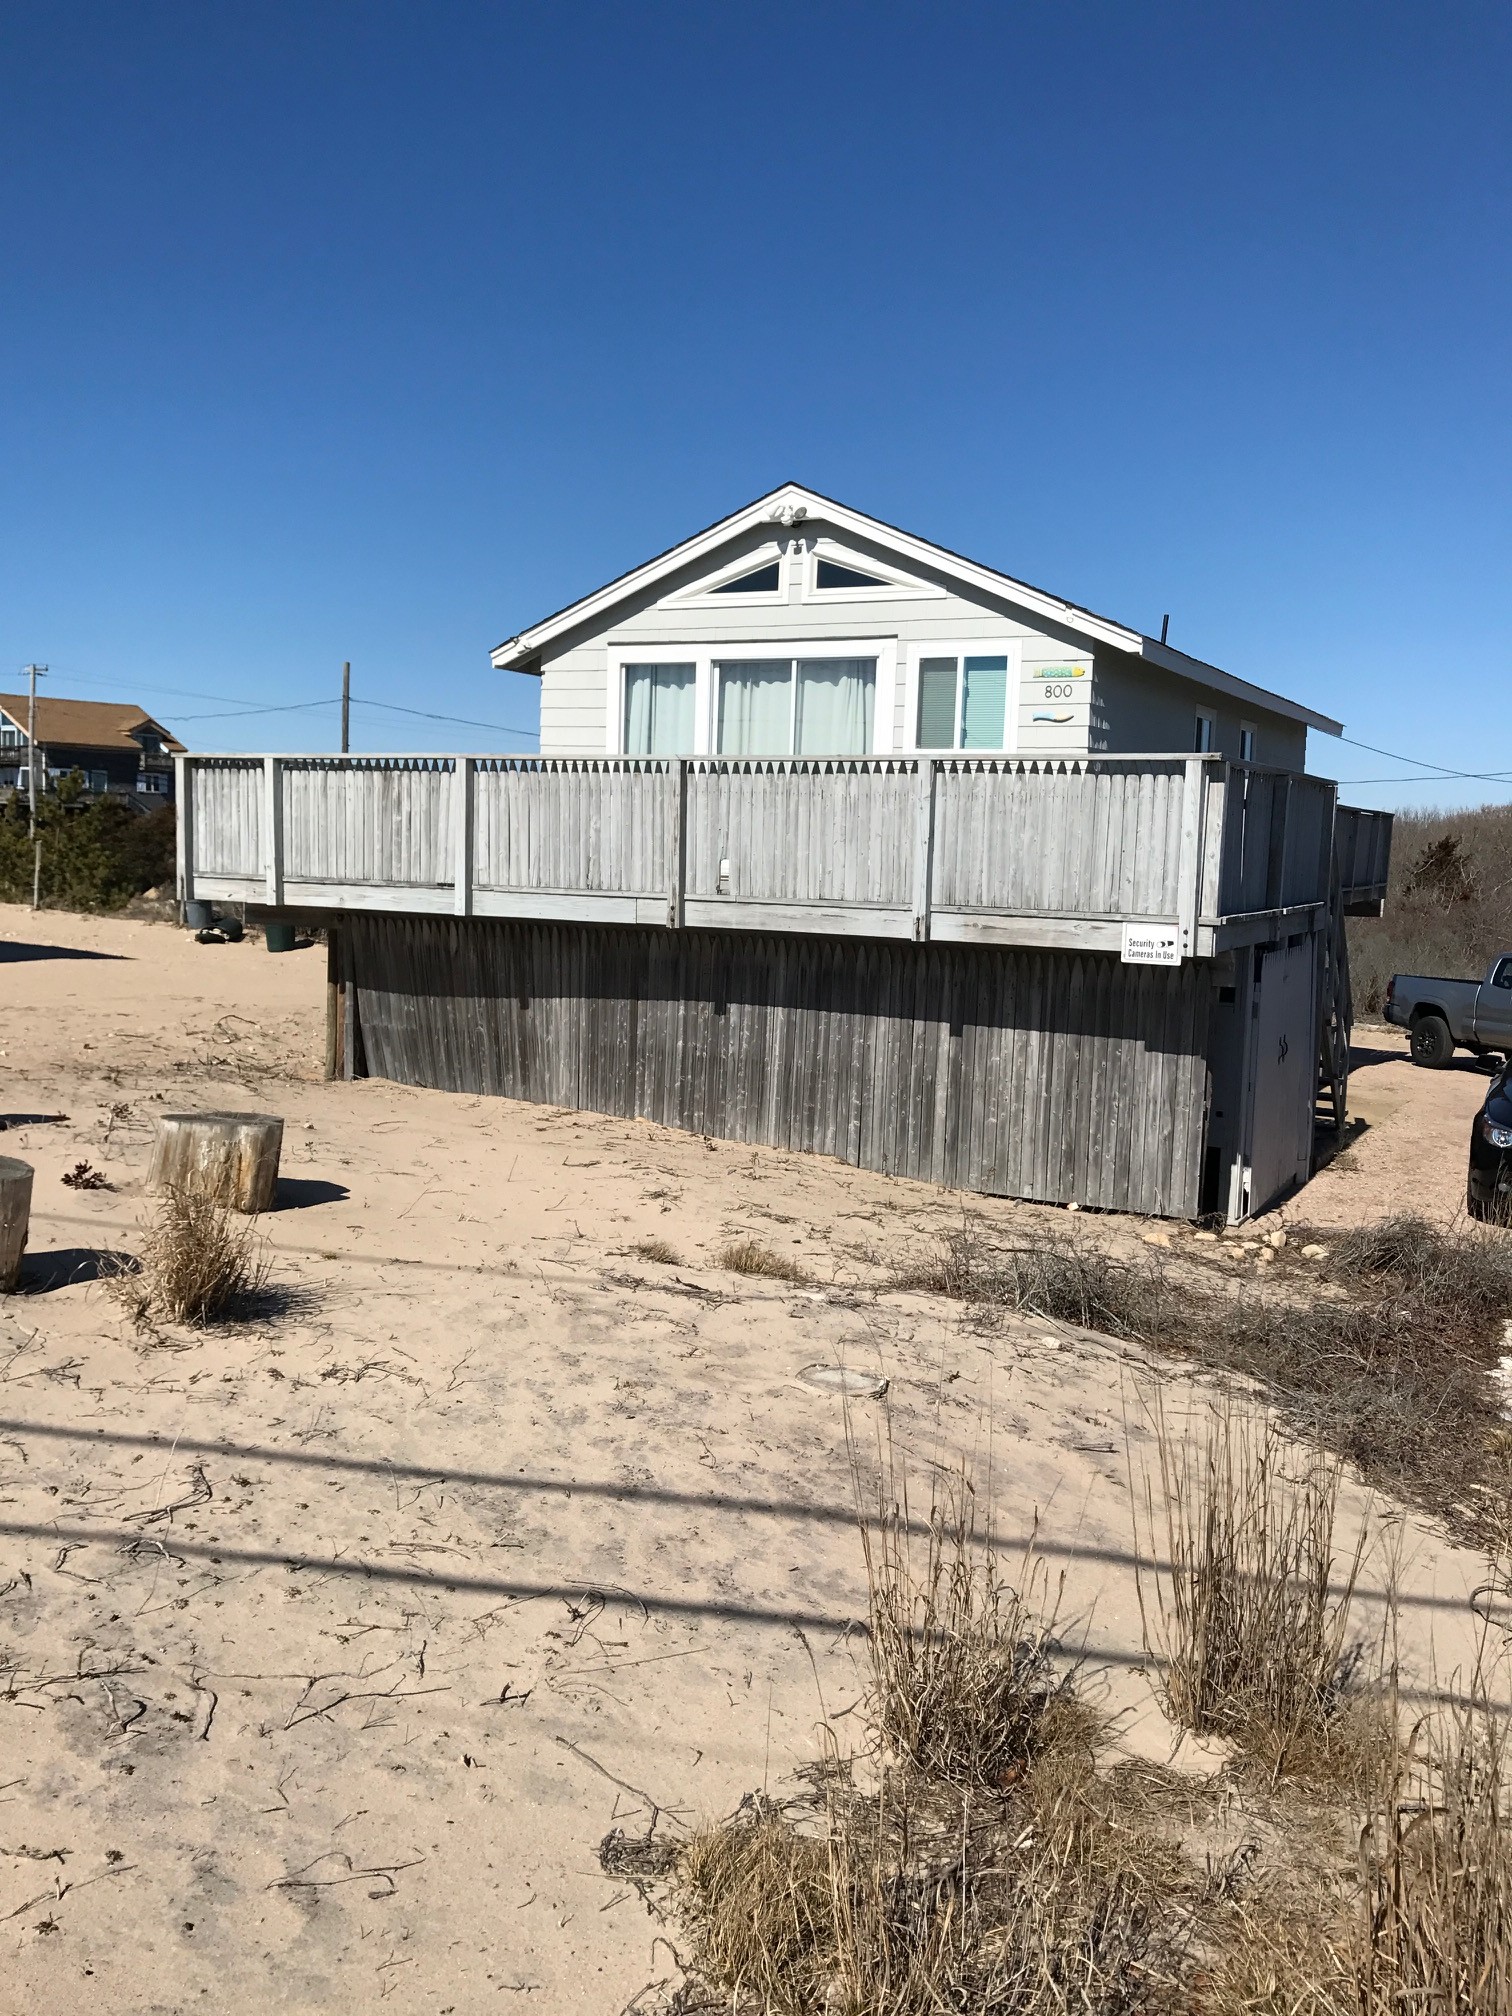 PESCE – across from the beach – Adorable 2 bedroom cottage (Not available)